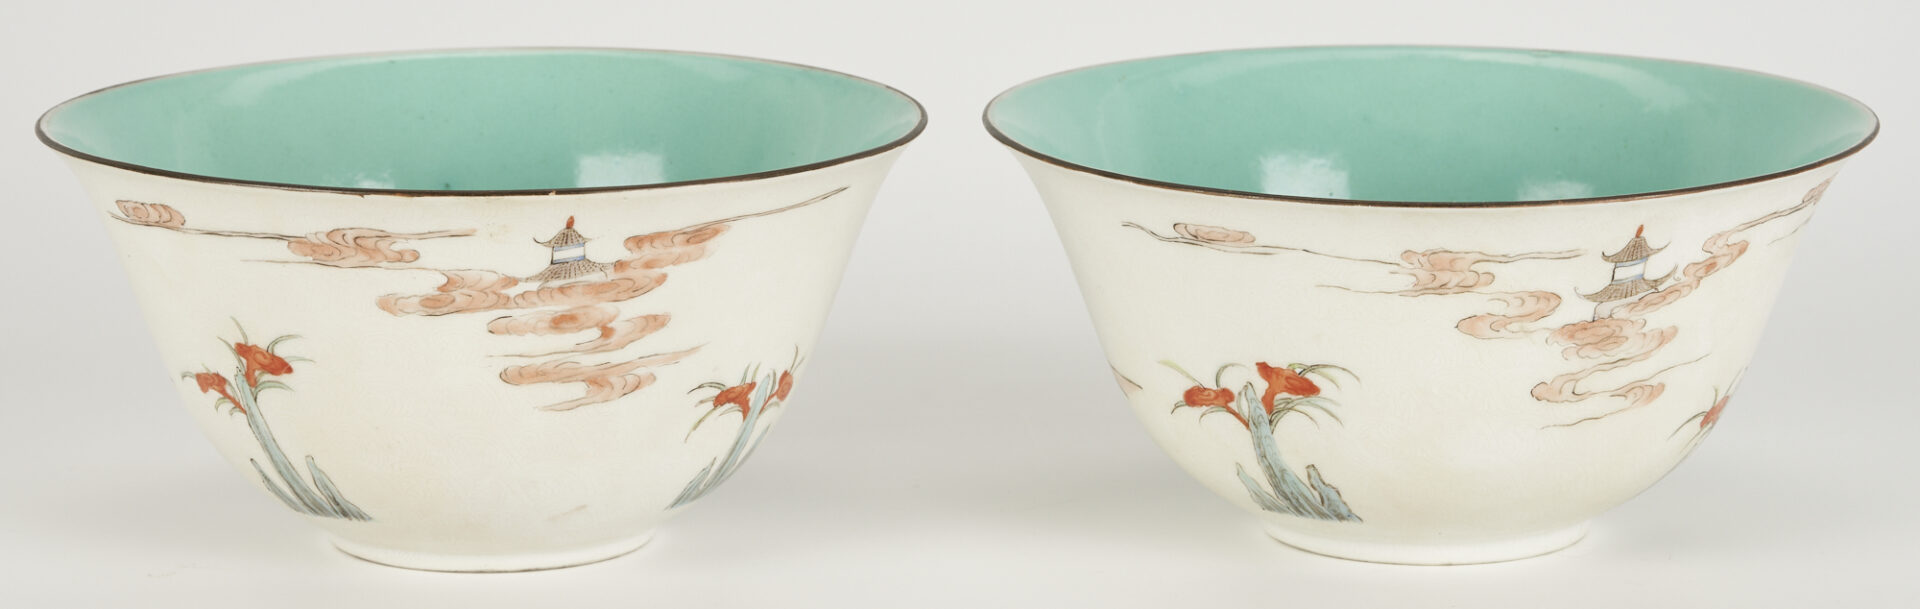 Lot 7: Pr. Chinese Porcelain Bowls with Turquoise Glaze and Figural Decoration